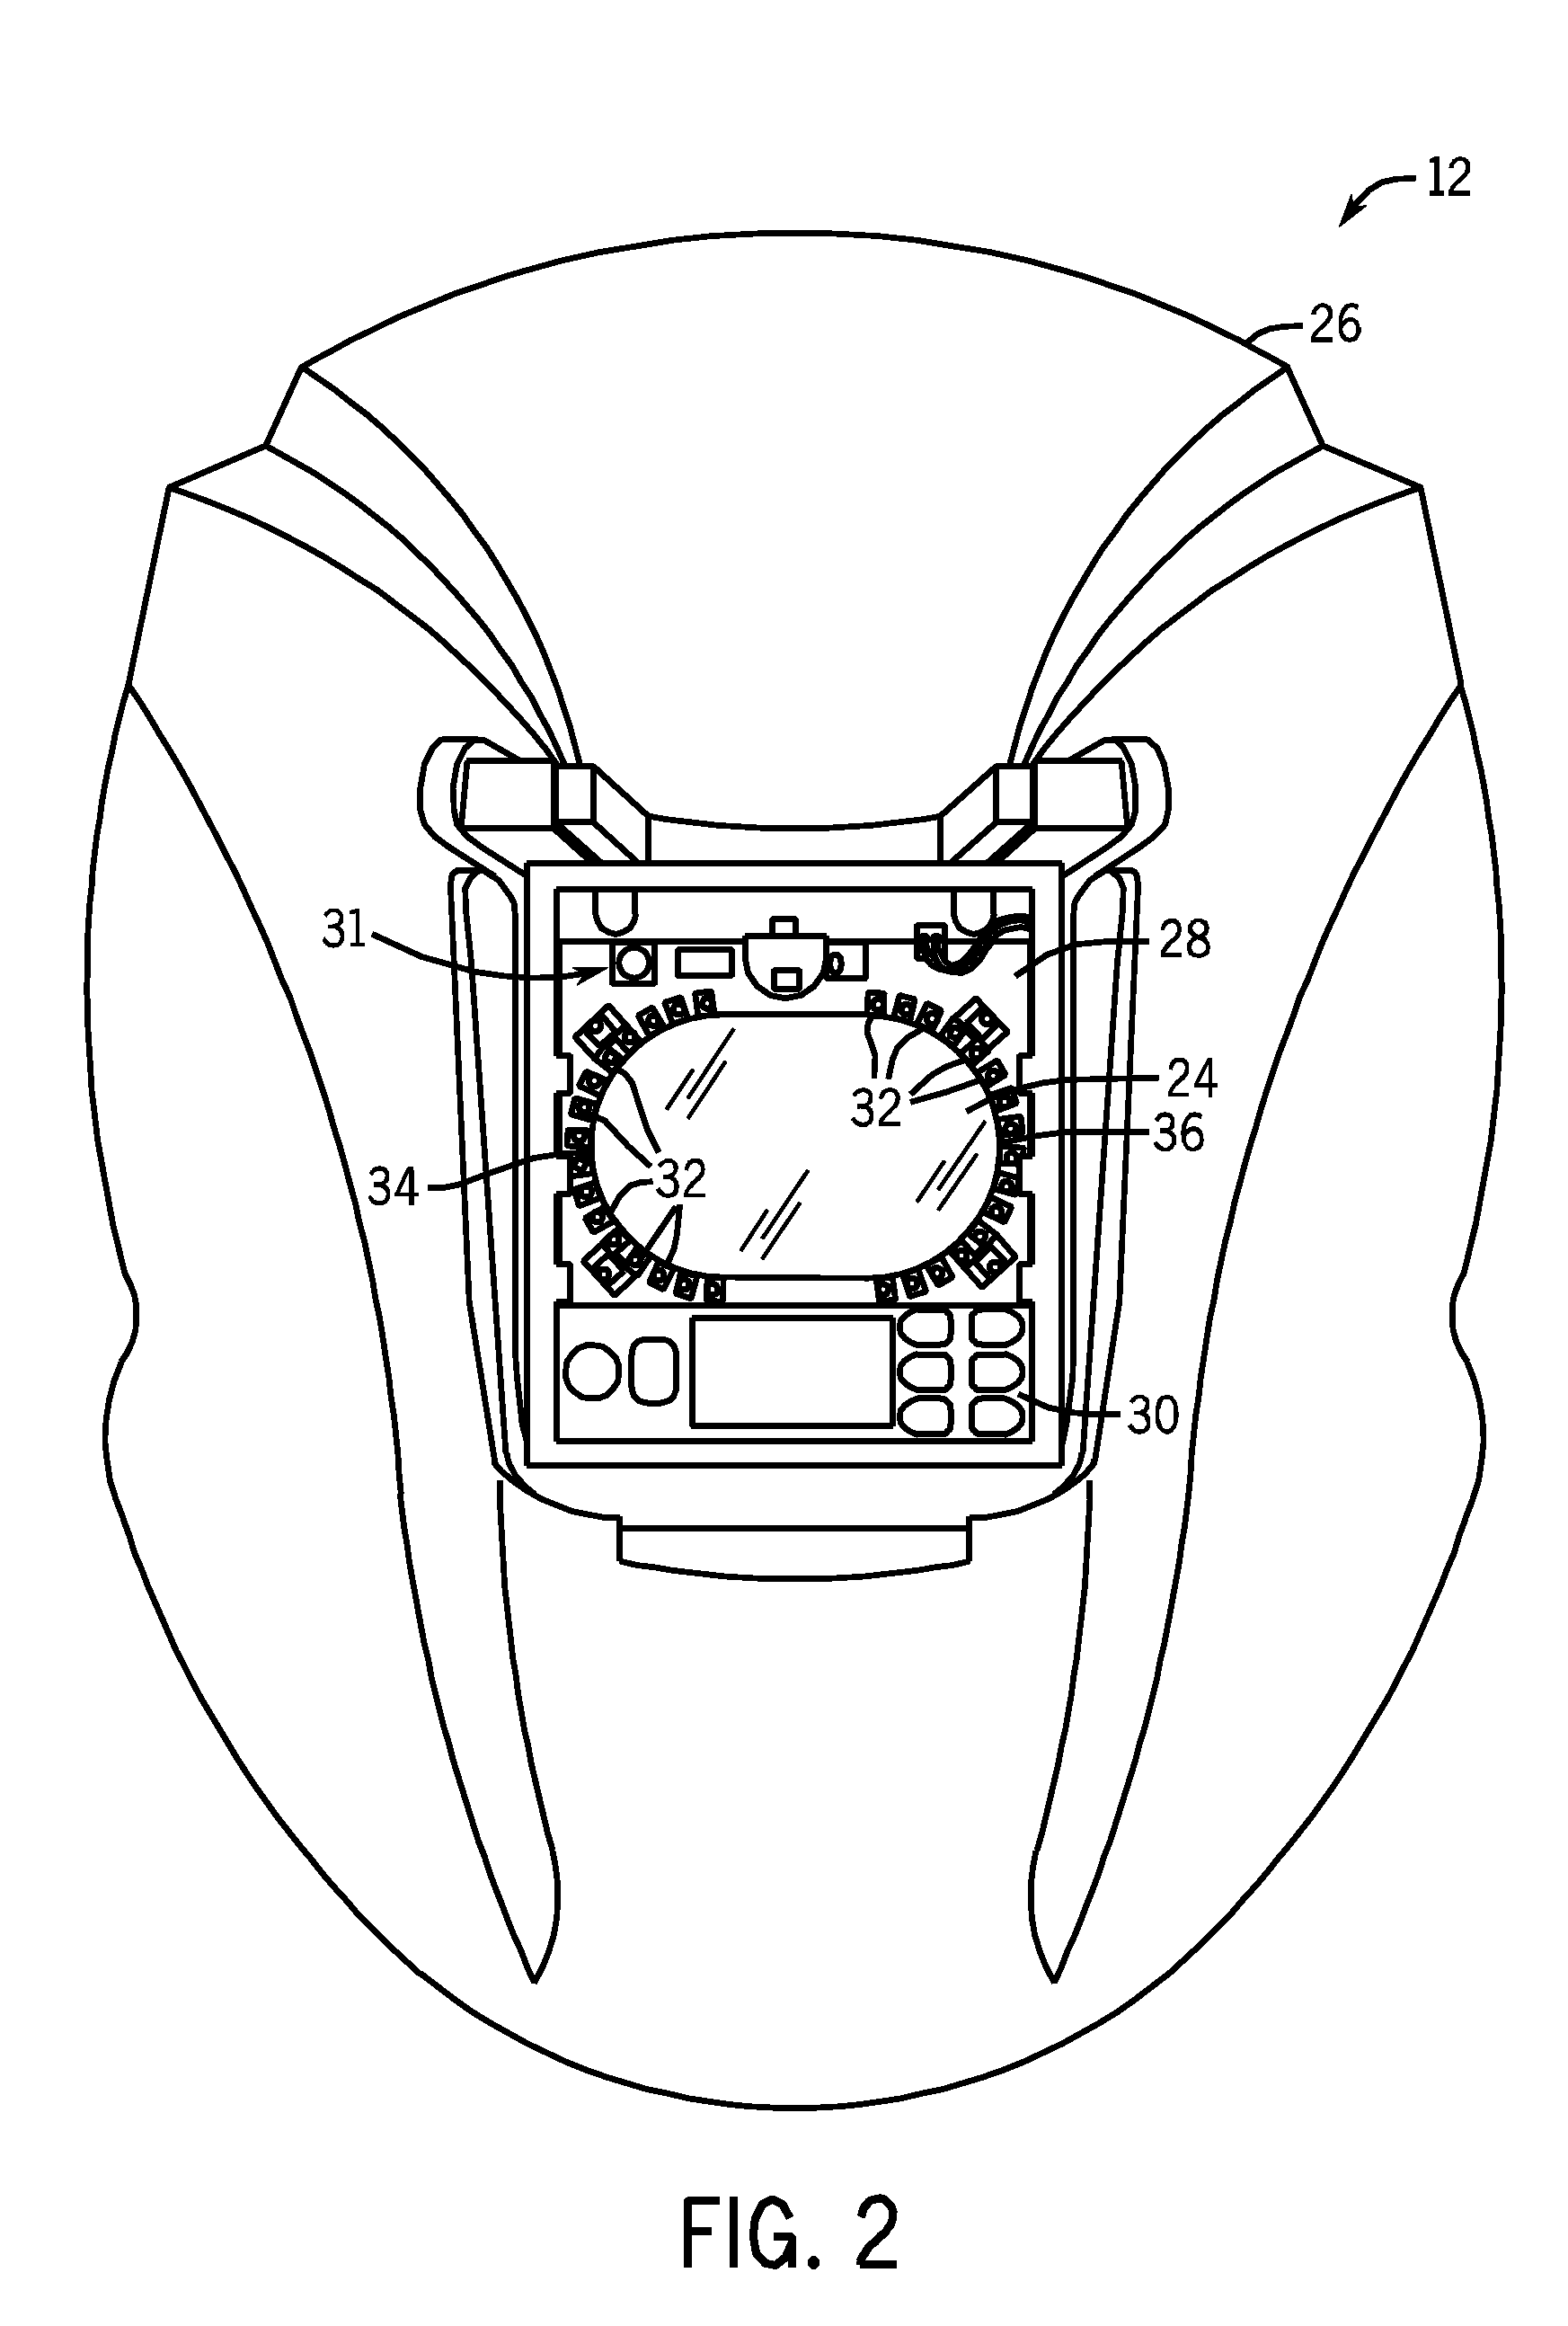 Weld characteristic communication system for a welding mask